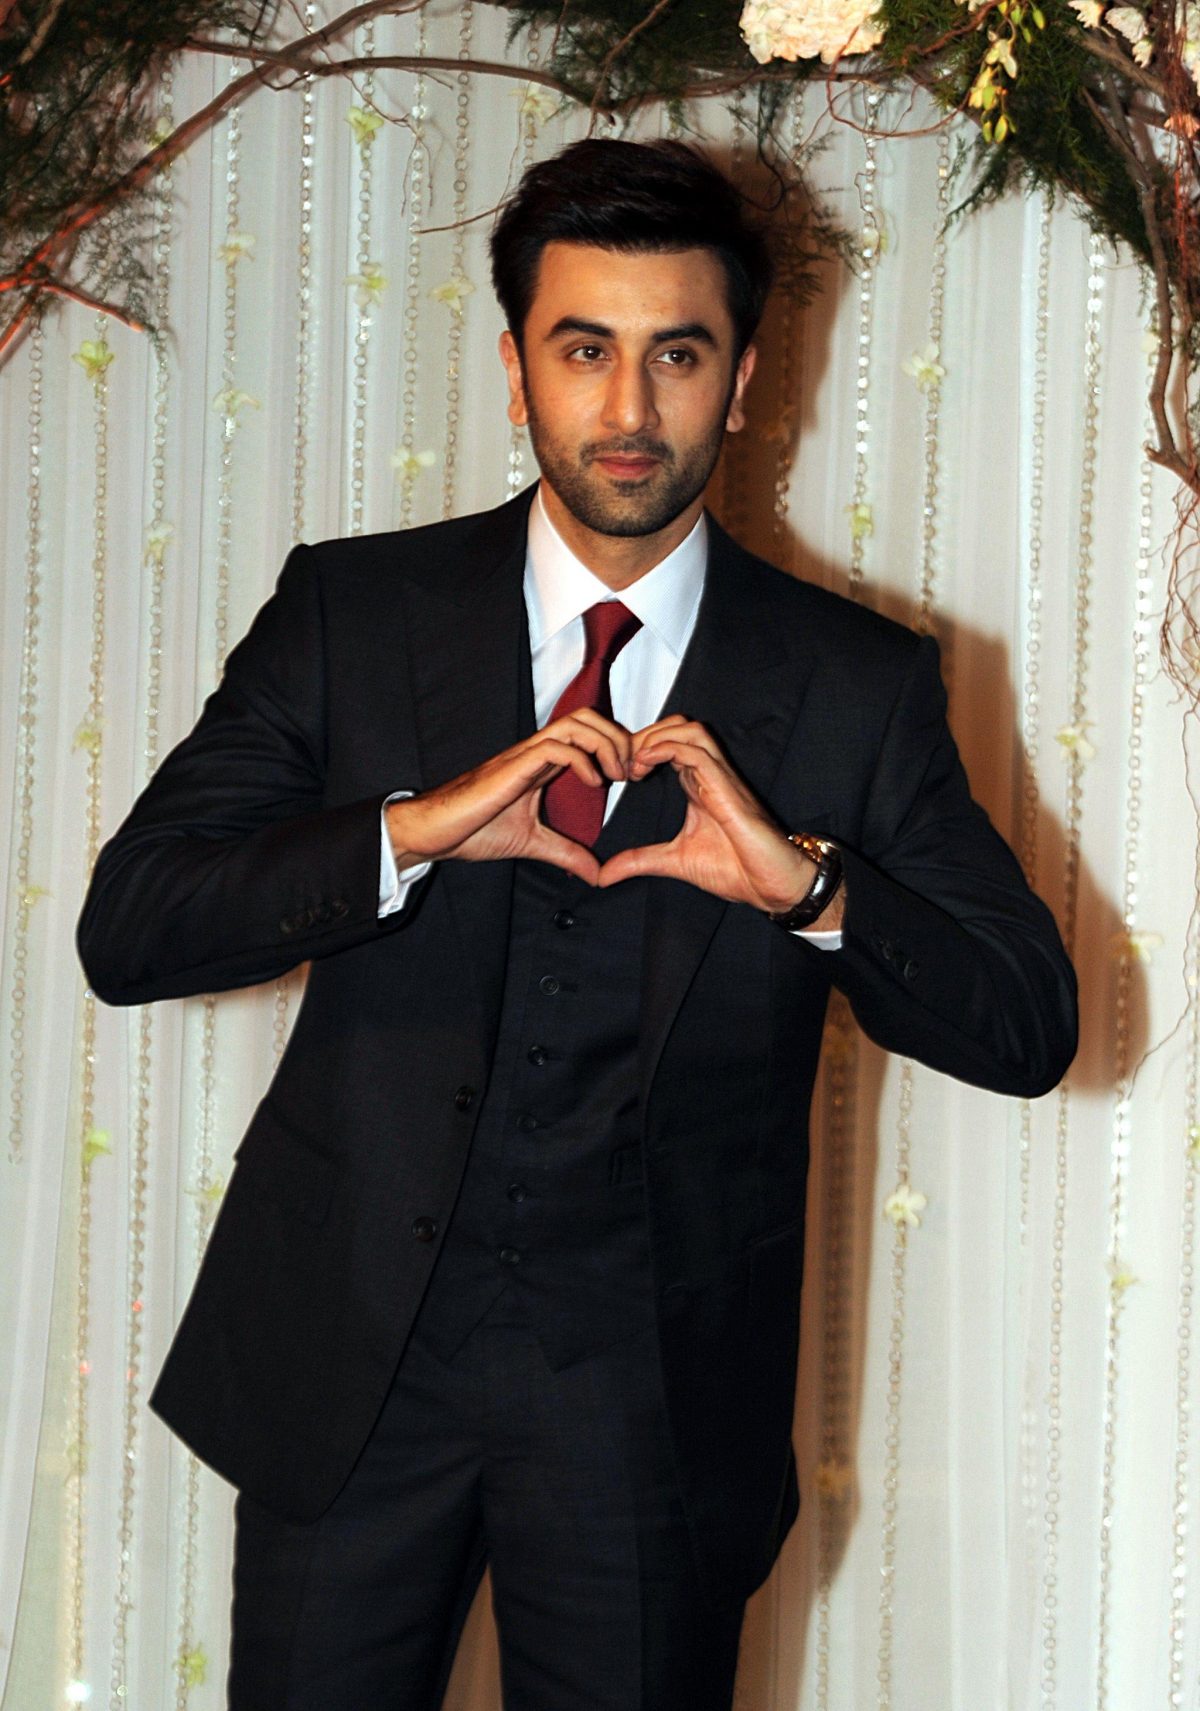 Ranbir Kapoor's Fashion Outings Prove 'One Should Dress Well, but Keep It  Simple